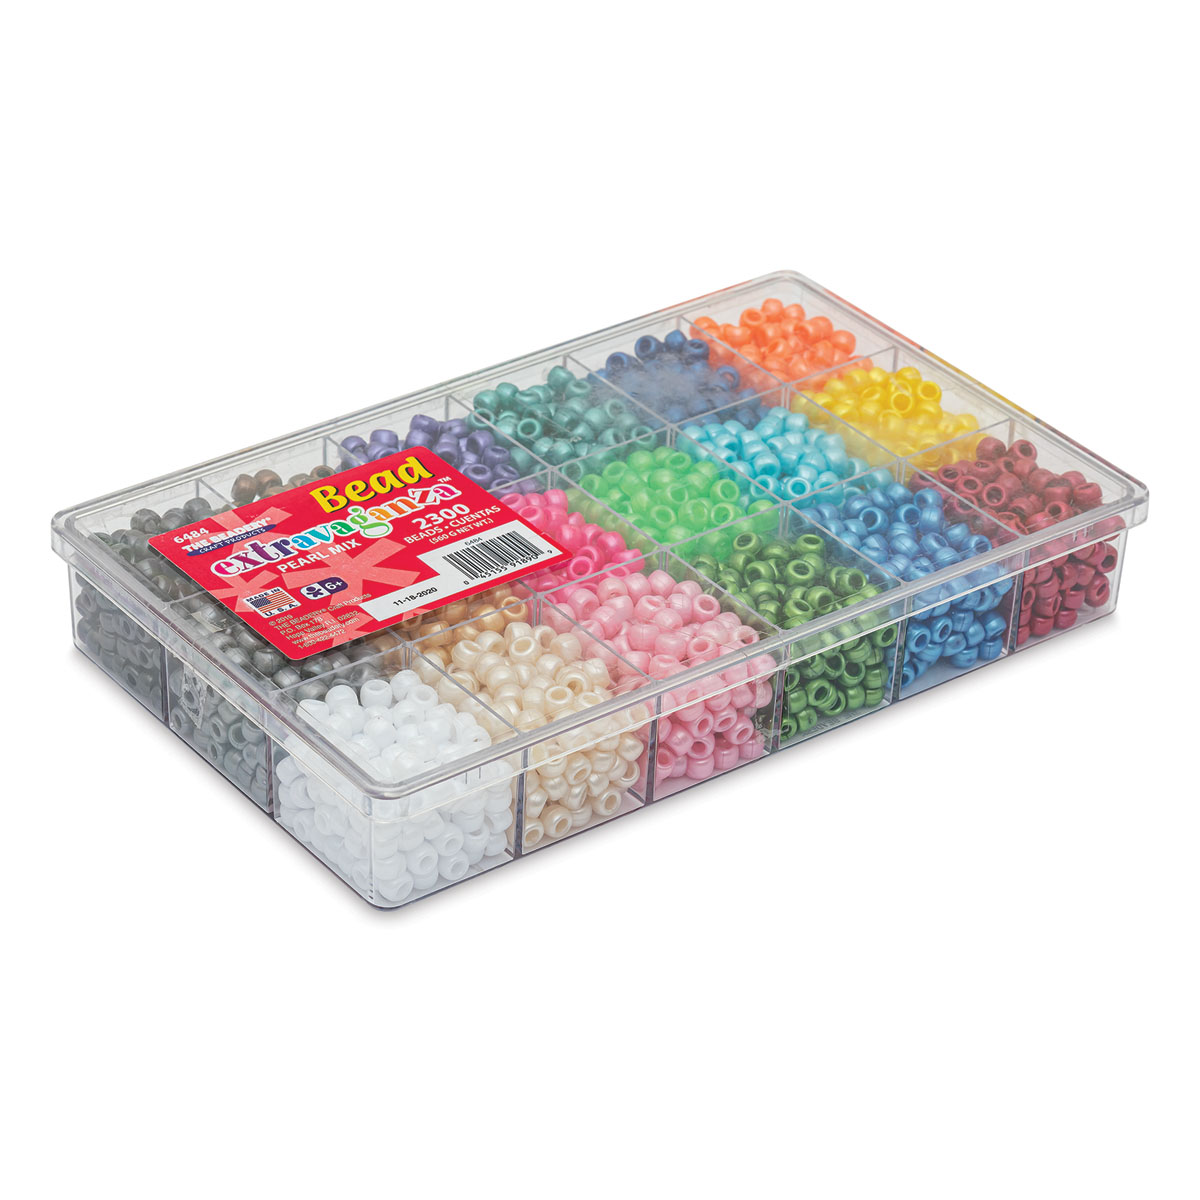 The Beadery Bead Extravaganza Boxes